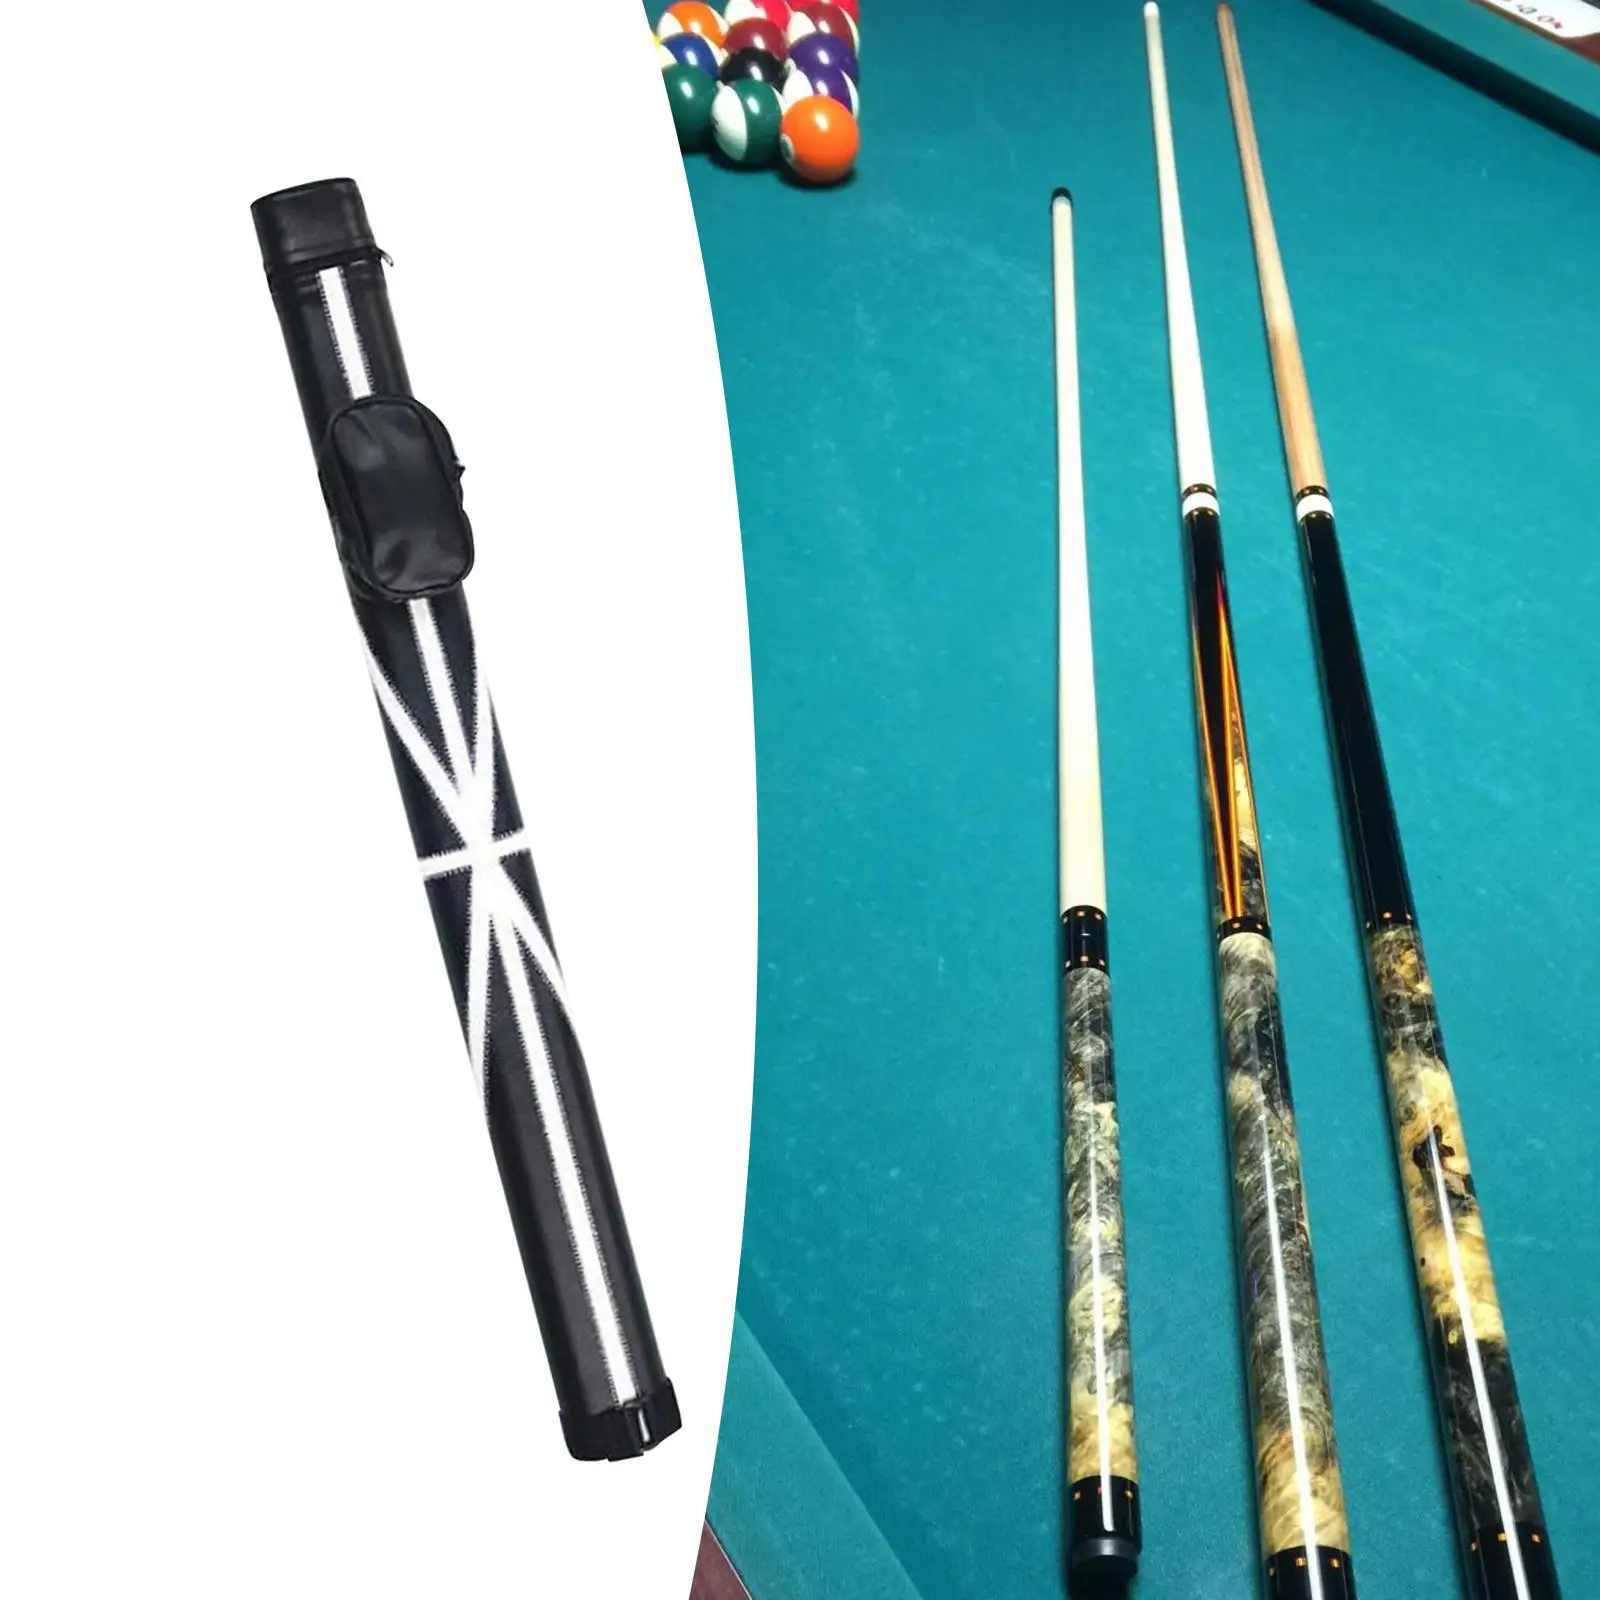 Billiards Pool Snooker Cue Storage Pouch PU Lightweight Pool Cue Carrying Bag for Travel Billiards Accessories